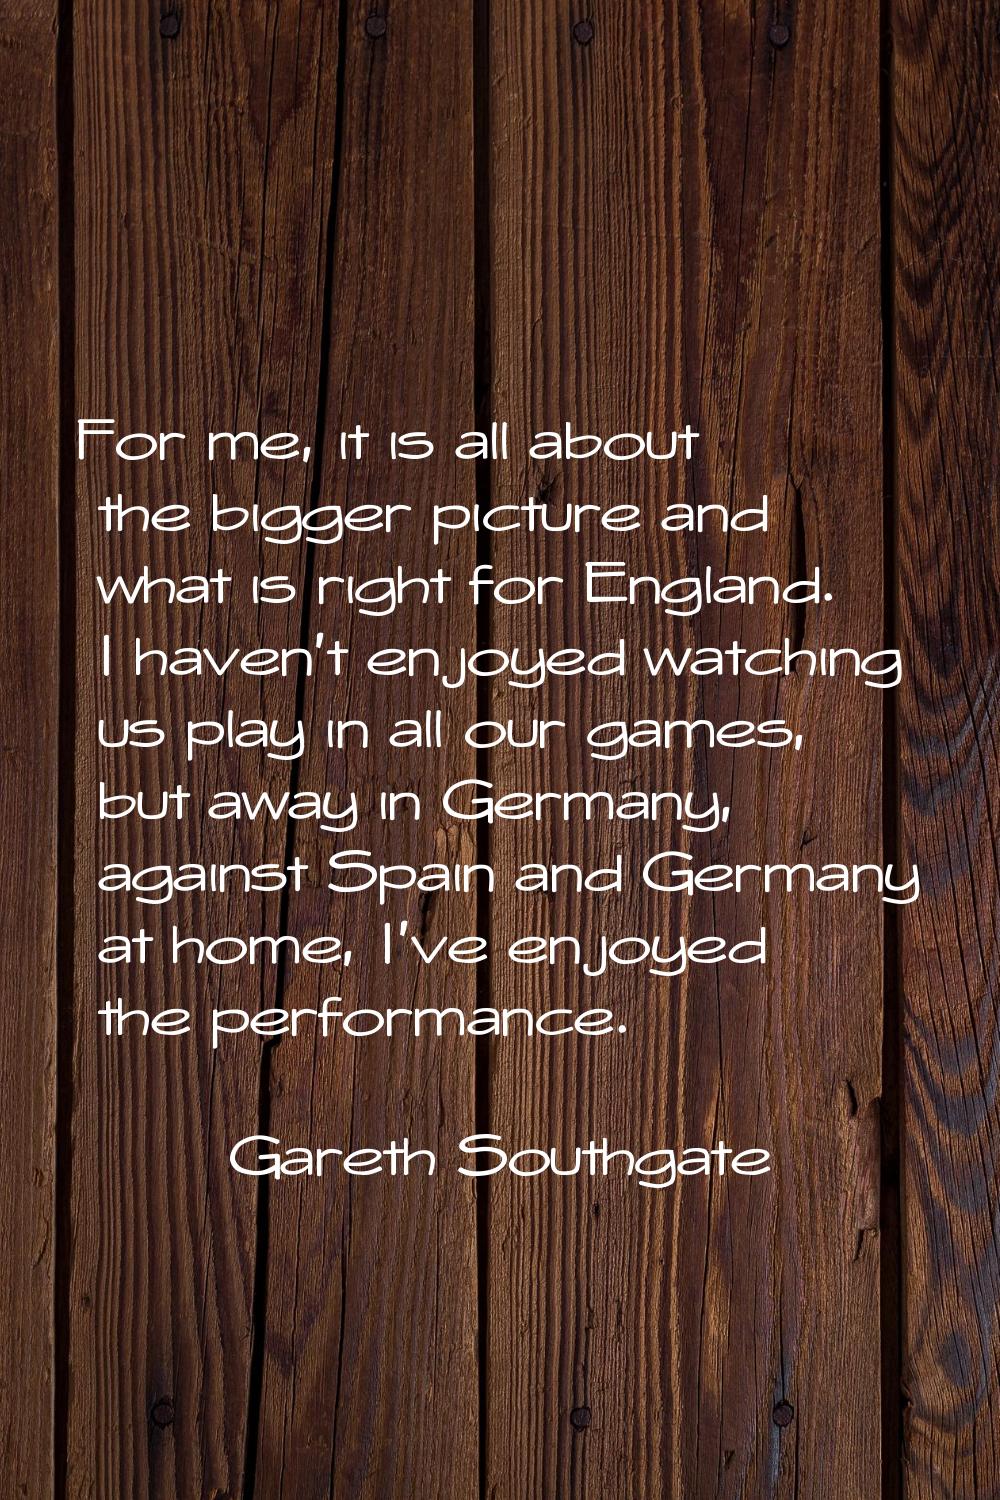 For me, it is all about the bigger picture and what is right for England. I haven't enjoyed watchin